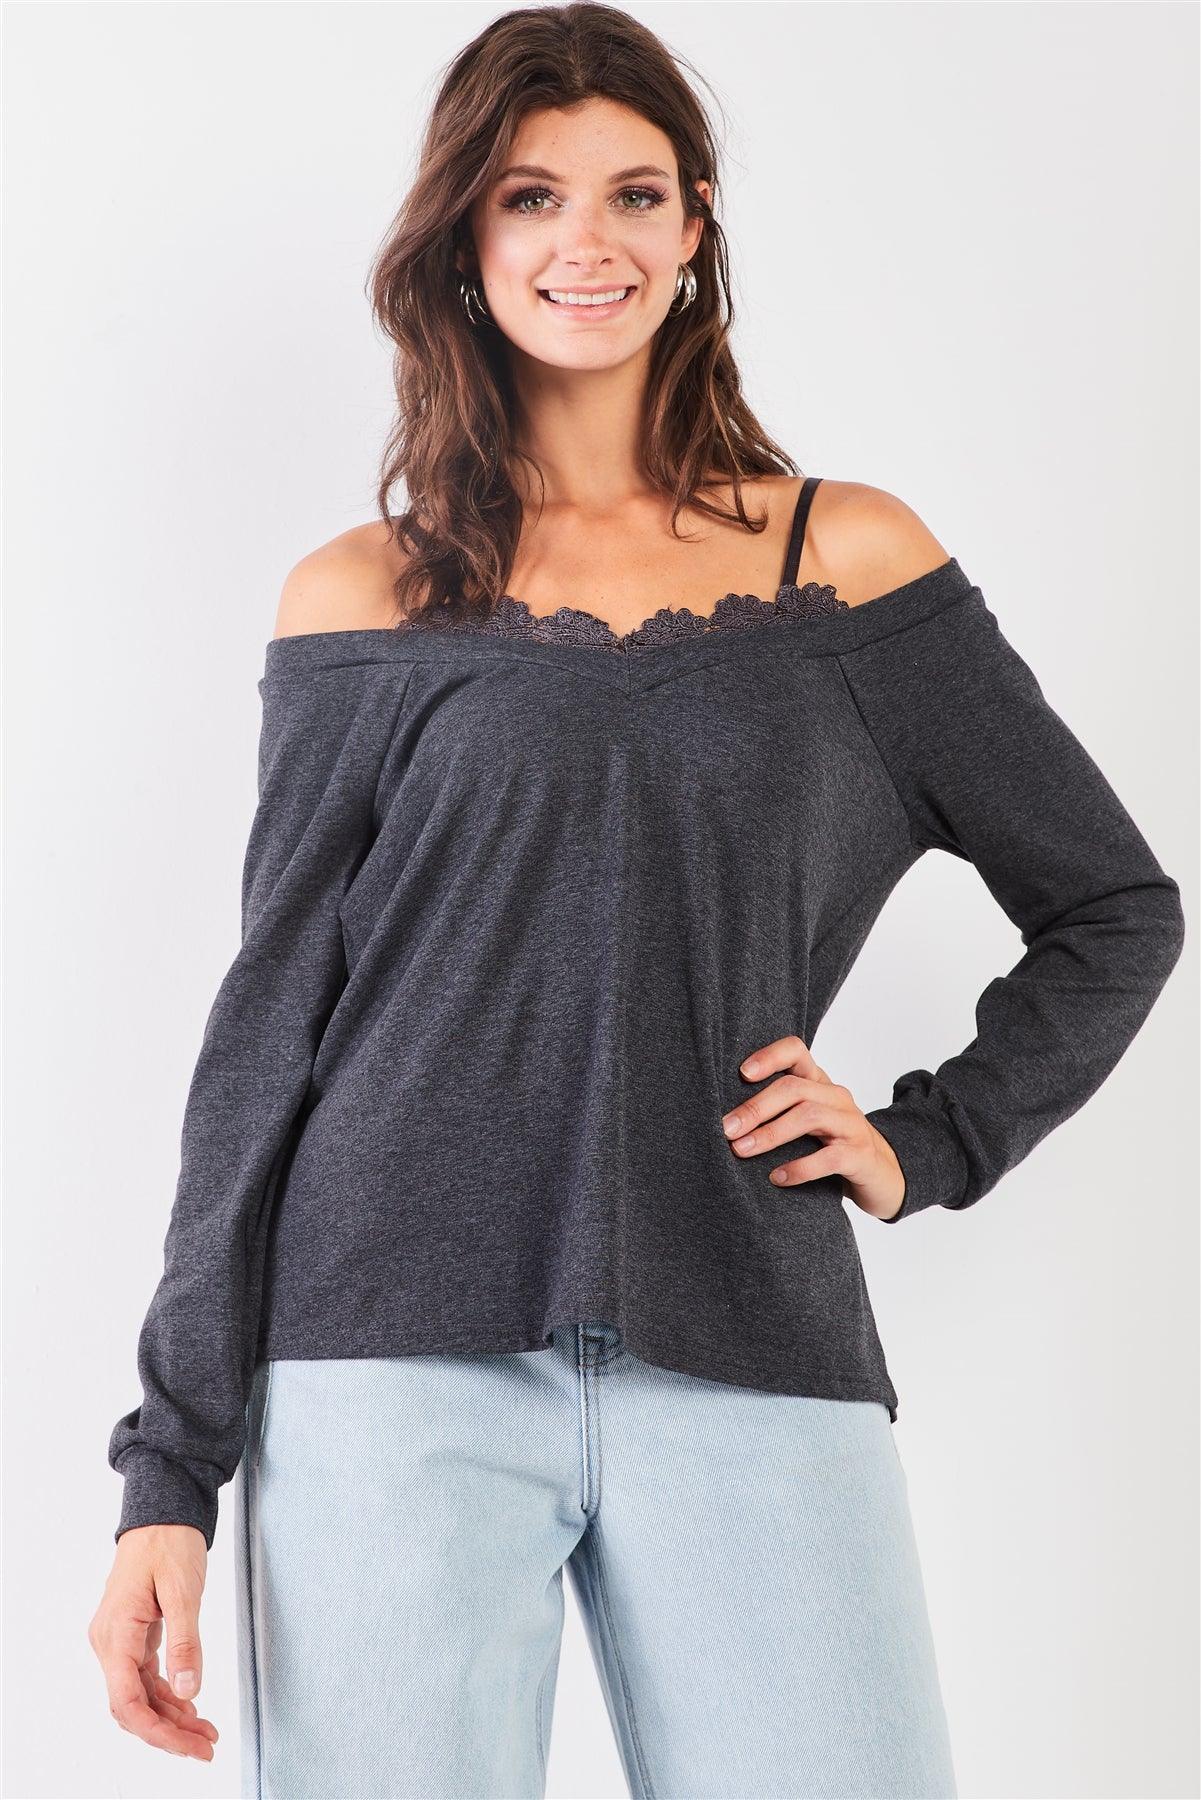 Charcoal Off-The-Shoulder Lace Trim Long Sleeve Sweetheart Neck Relaxed Top /2-2-1